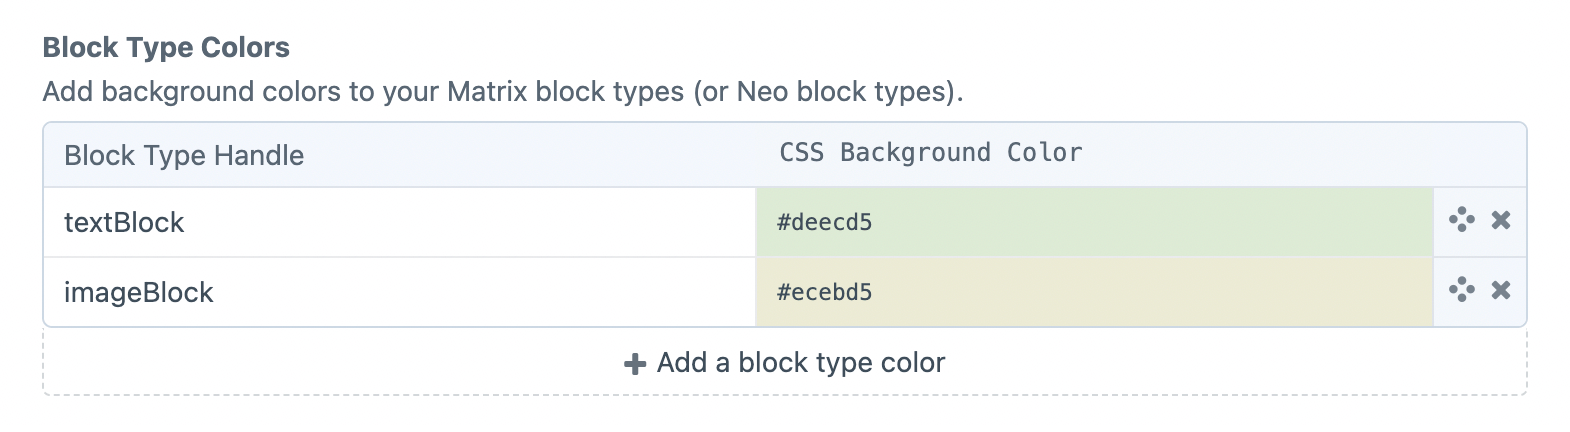 Example of block type settings page